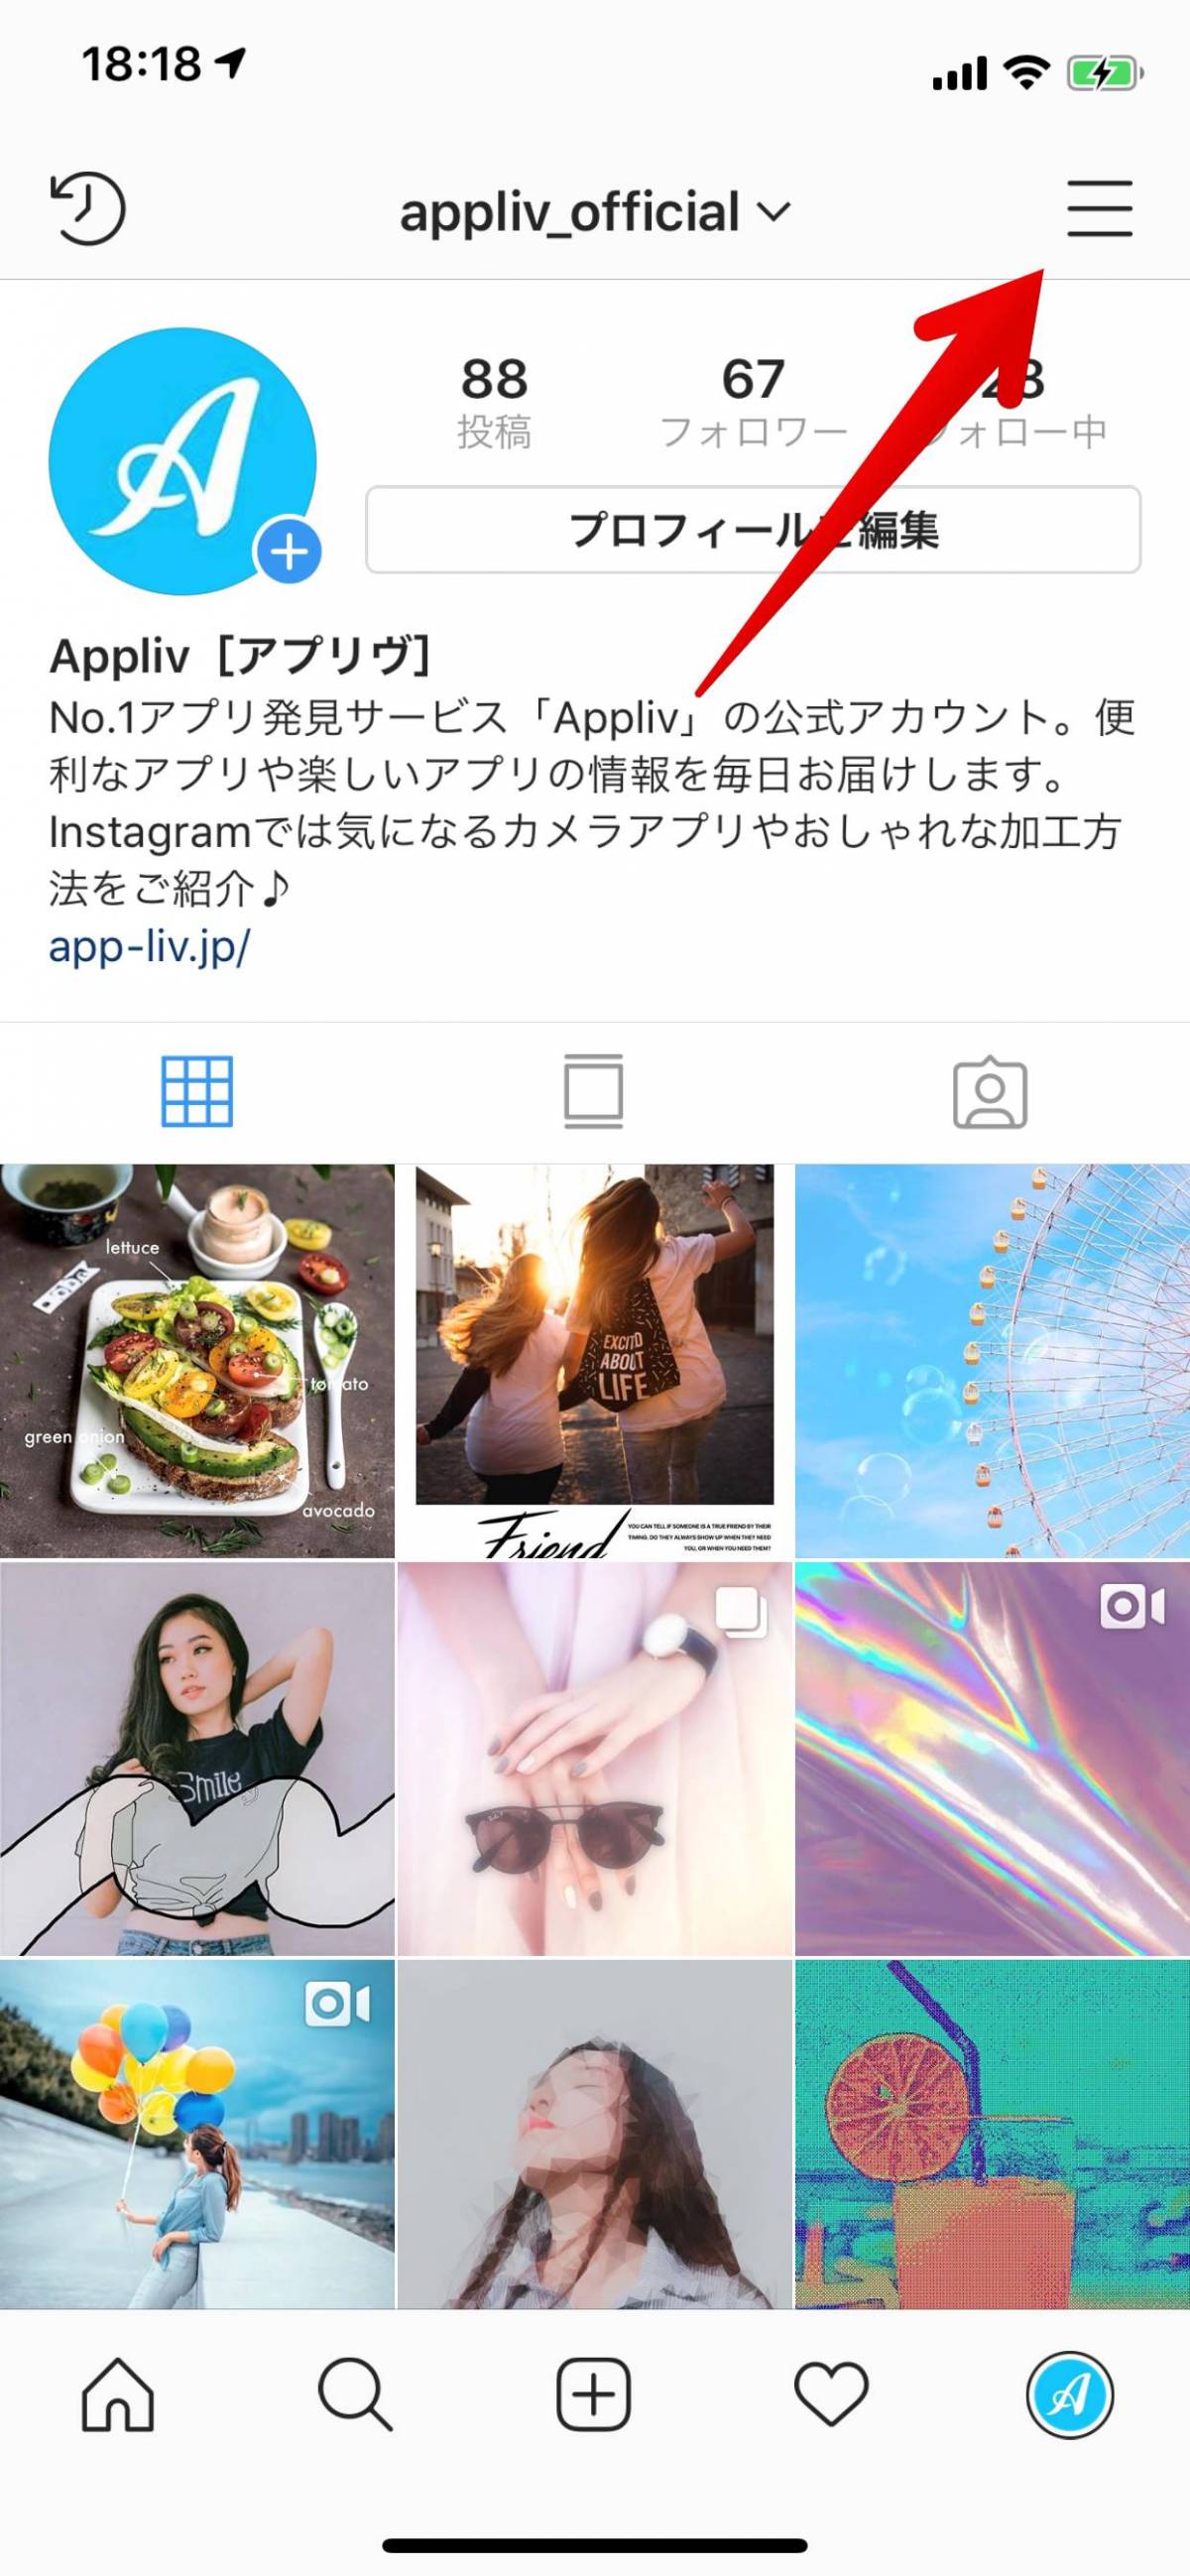 Instagram アーカイブ 使い方 投稿 ストーリーを非表示に Iphone Android Appliv Topics